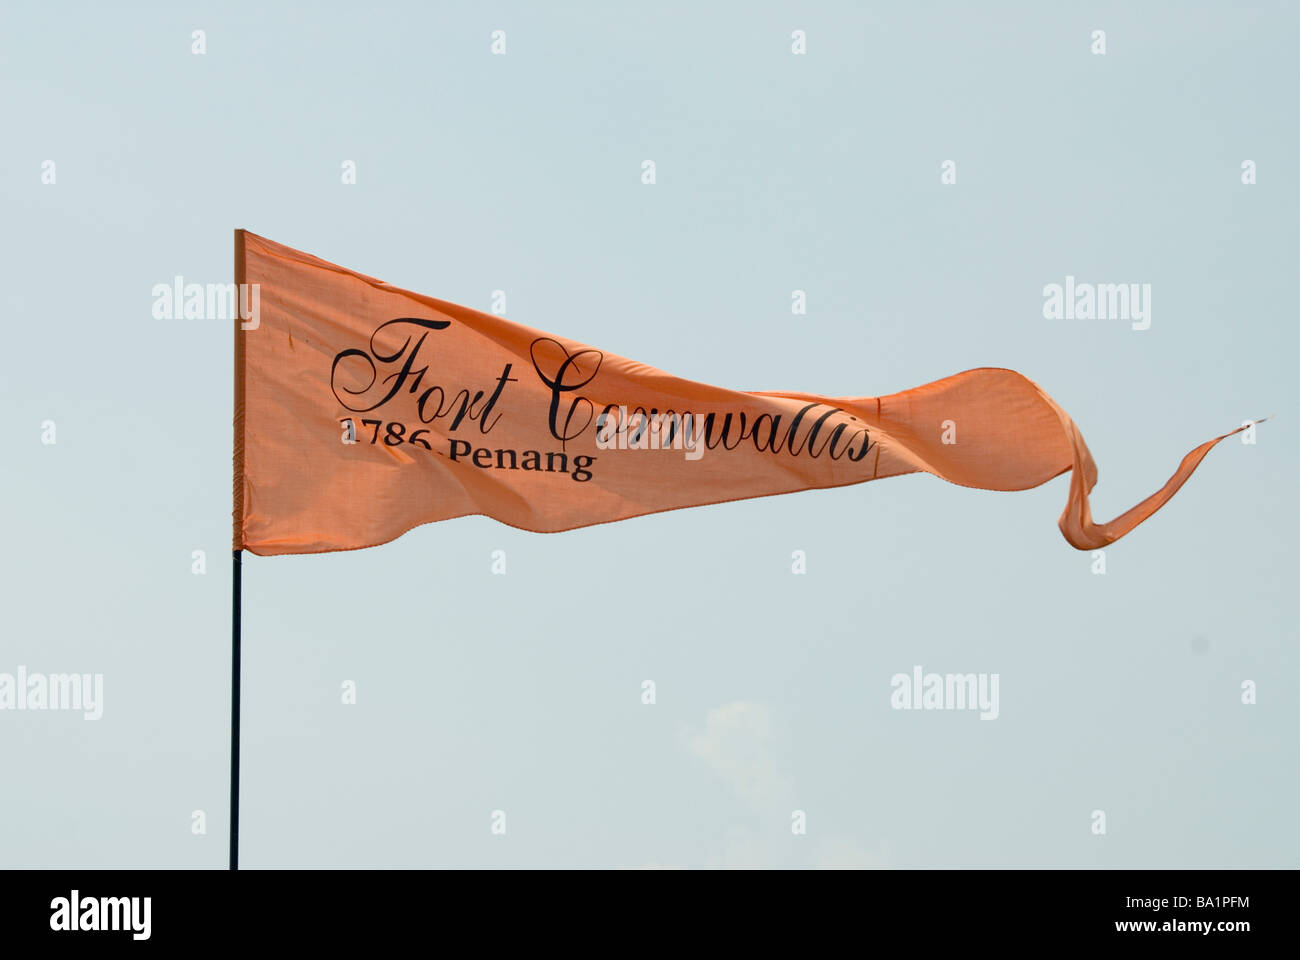 Fluttering flag on Fort Cornwallis, on the island of Penang in Malaysia Stock Photo